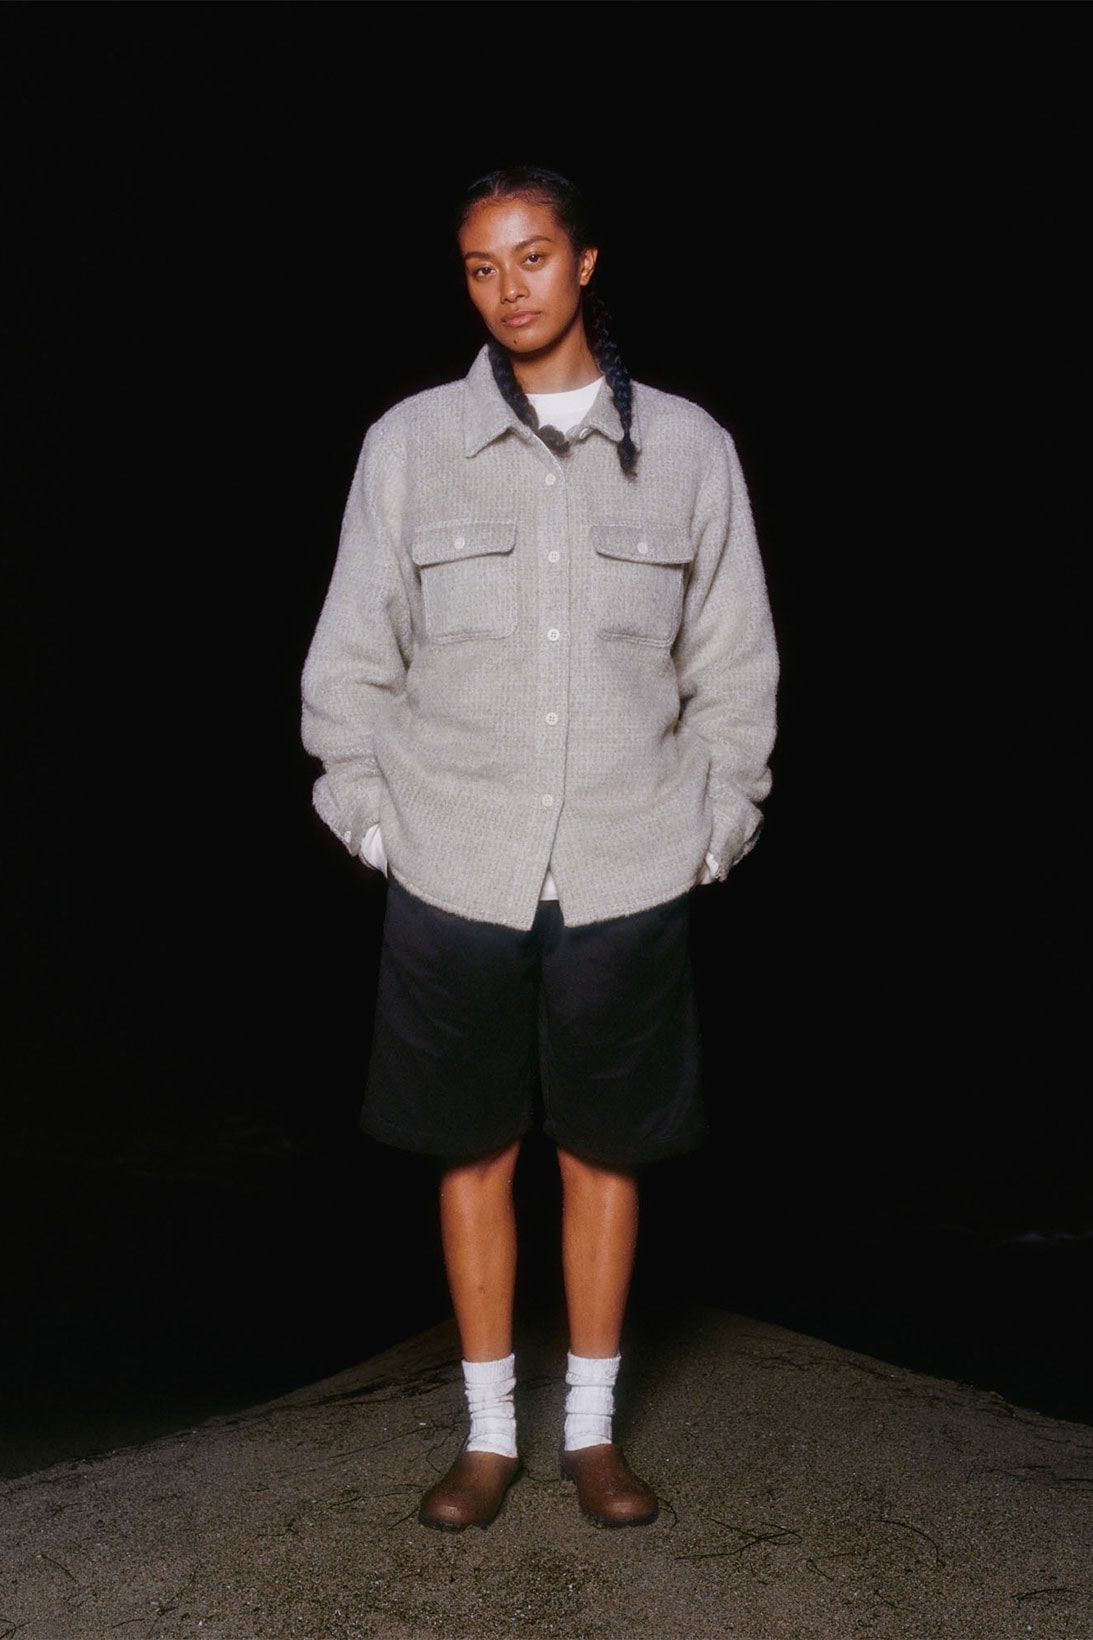 Stussy Holiday Collection Lookbook Release Knitwear Sweater Vests Cardigans Date Info